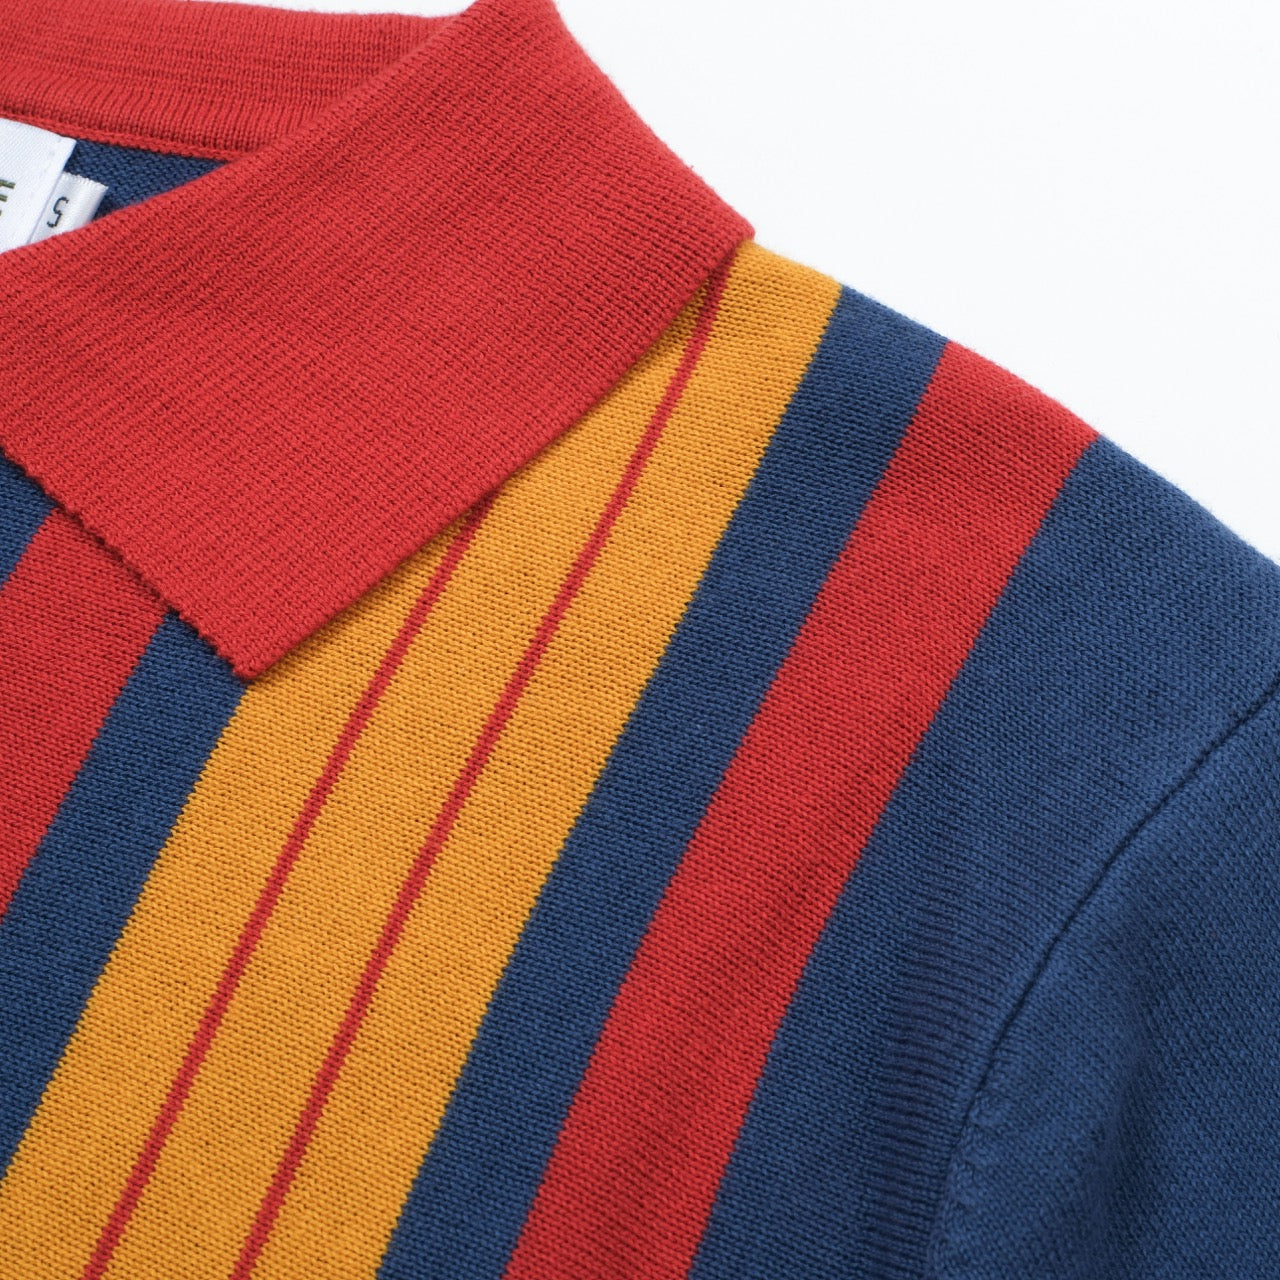 OXKNIT Men Vintage Clothing 1960s Mod Style Casual Stripe Blue & Yellow Knitted Retro Polo Shirt